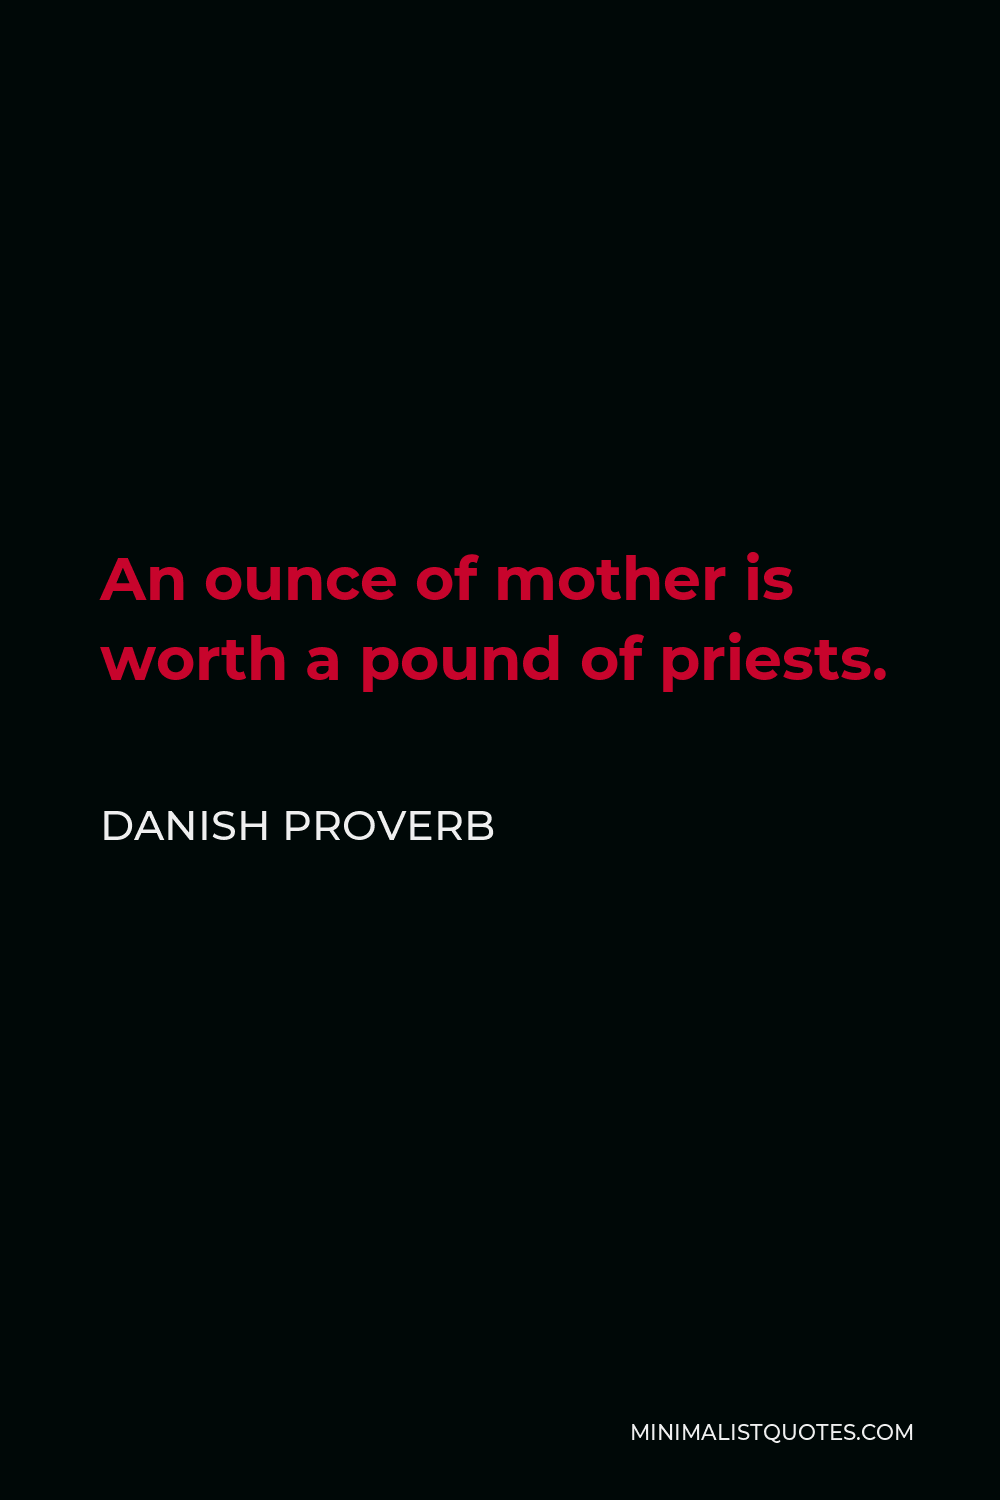 Danish Proverb Quote - An ounce of mother is worth a pound of priests.